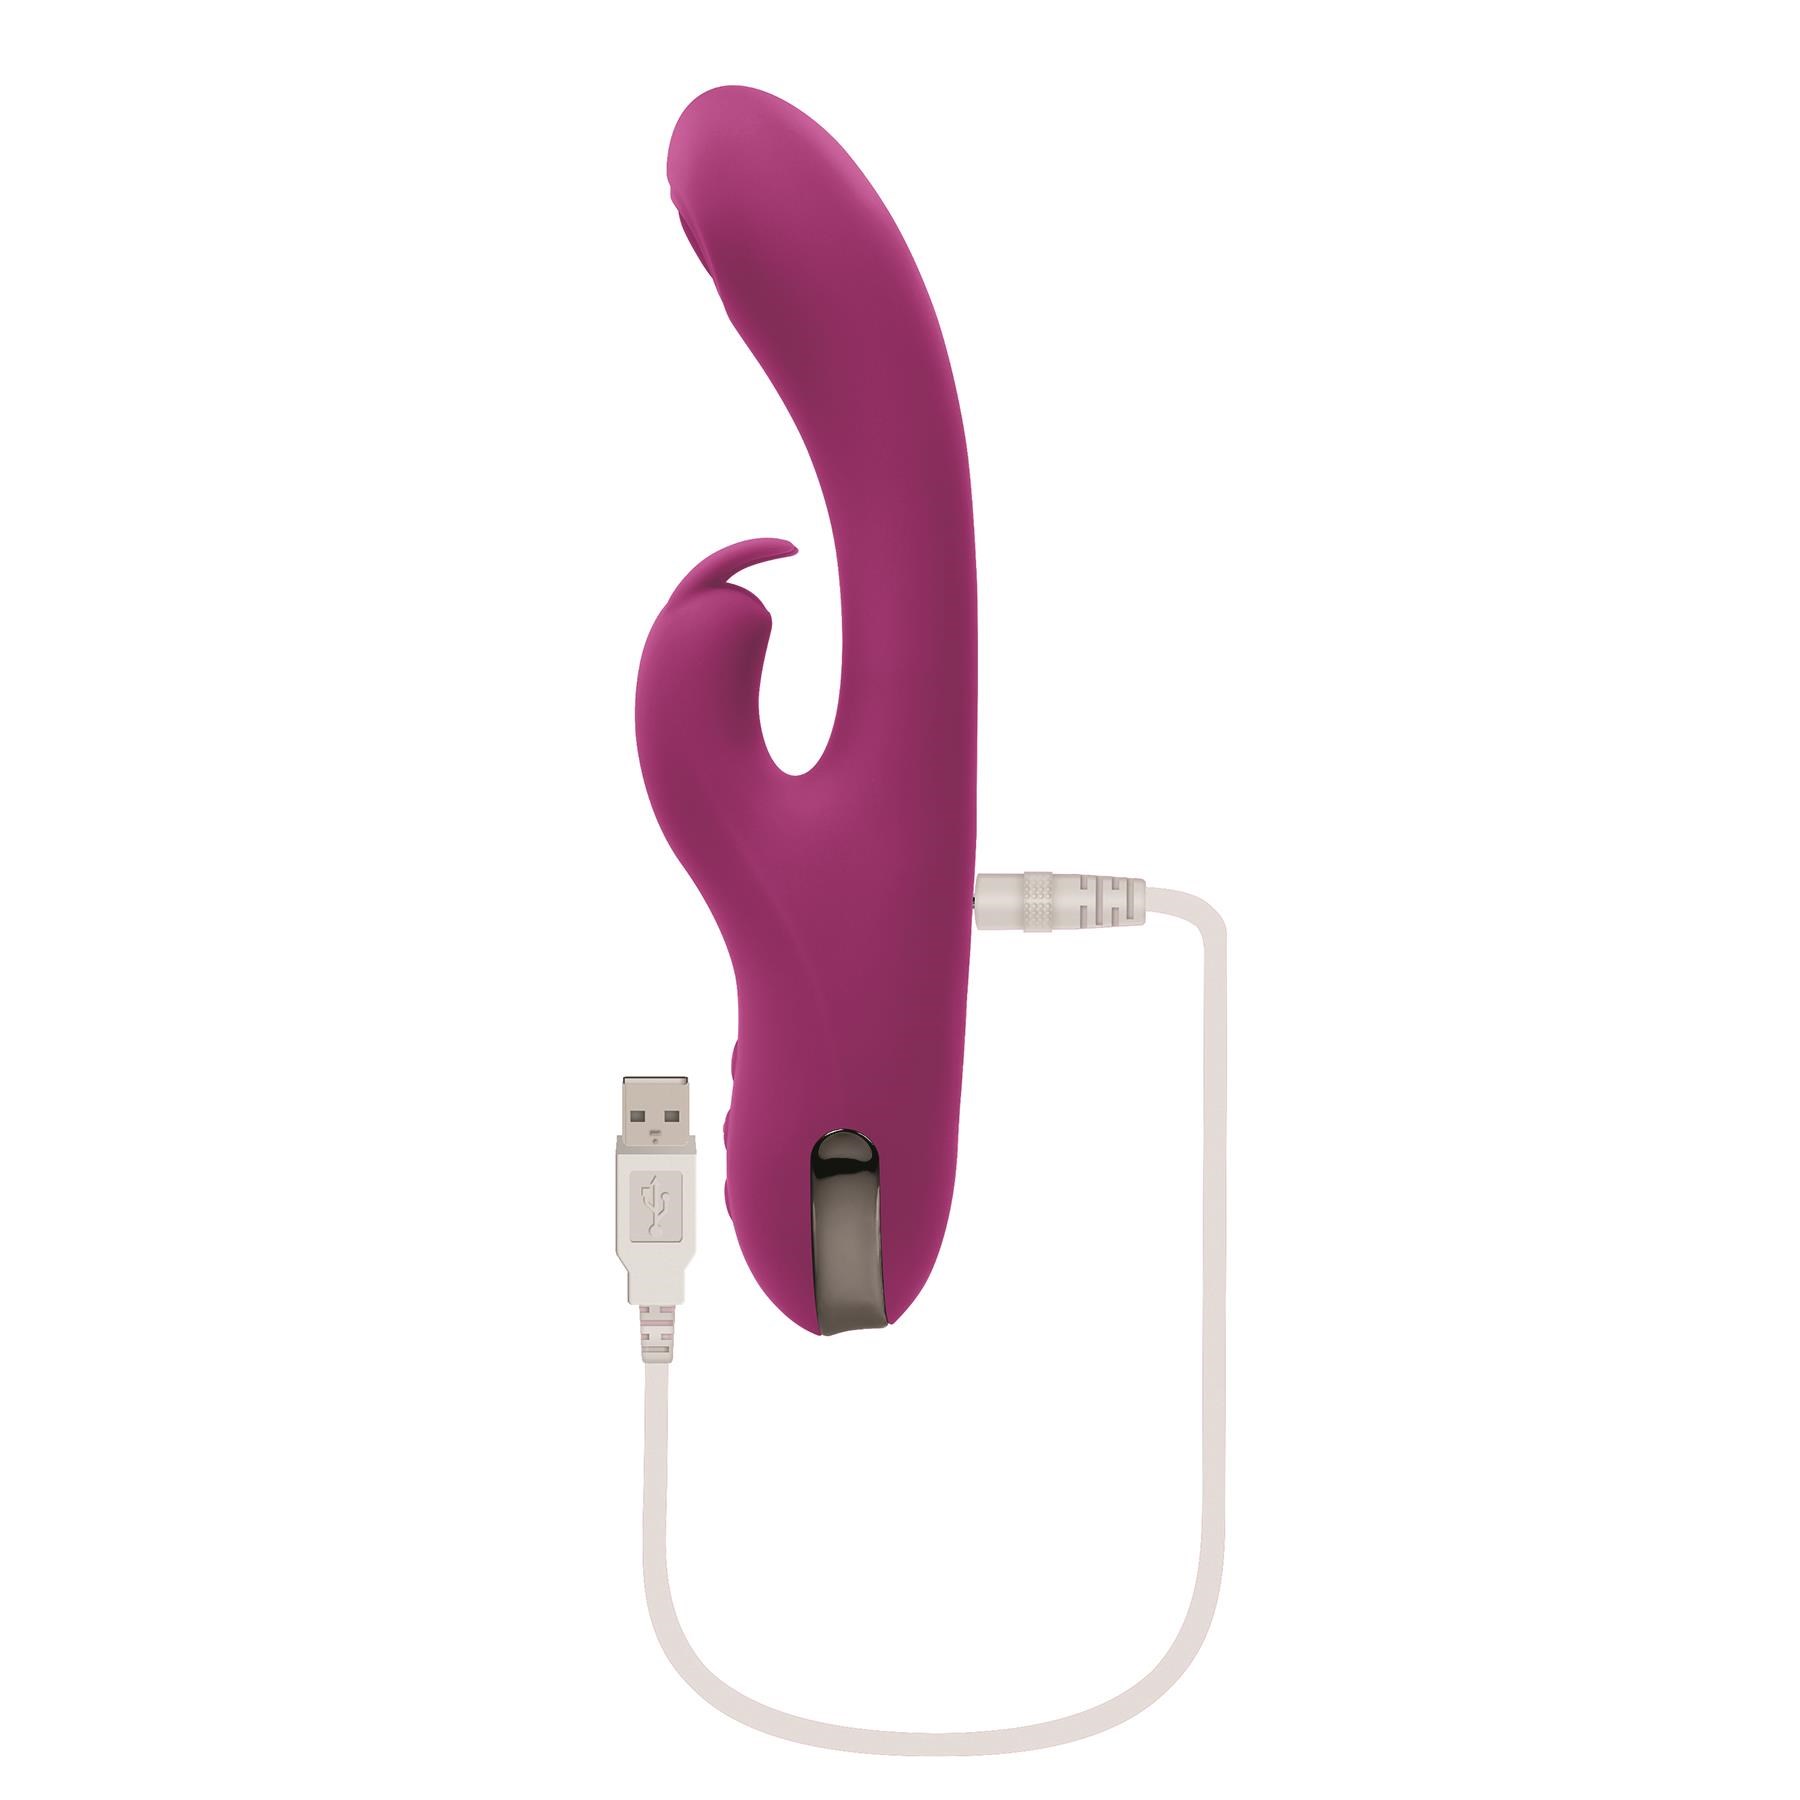 Playboy Pleasure Thumper Rabbit Massager - Showing Where Charging Cable is Placed